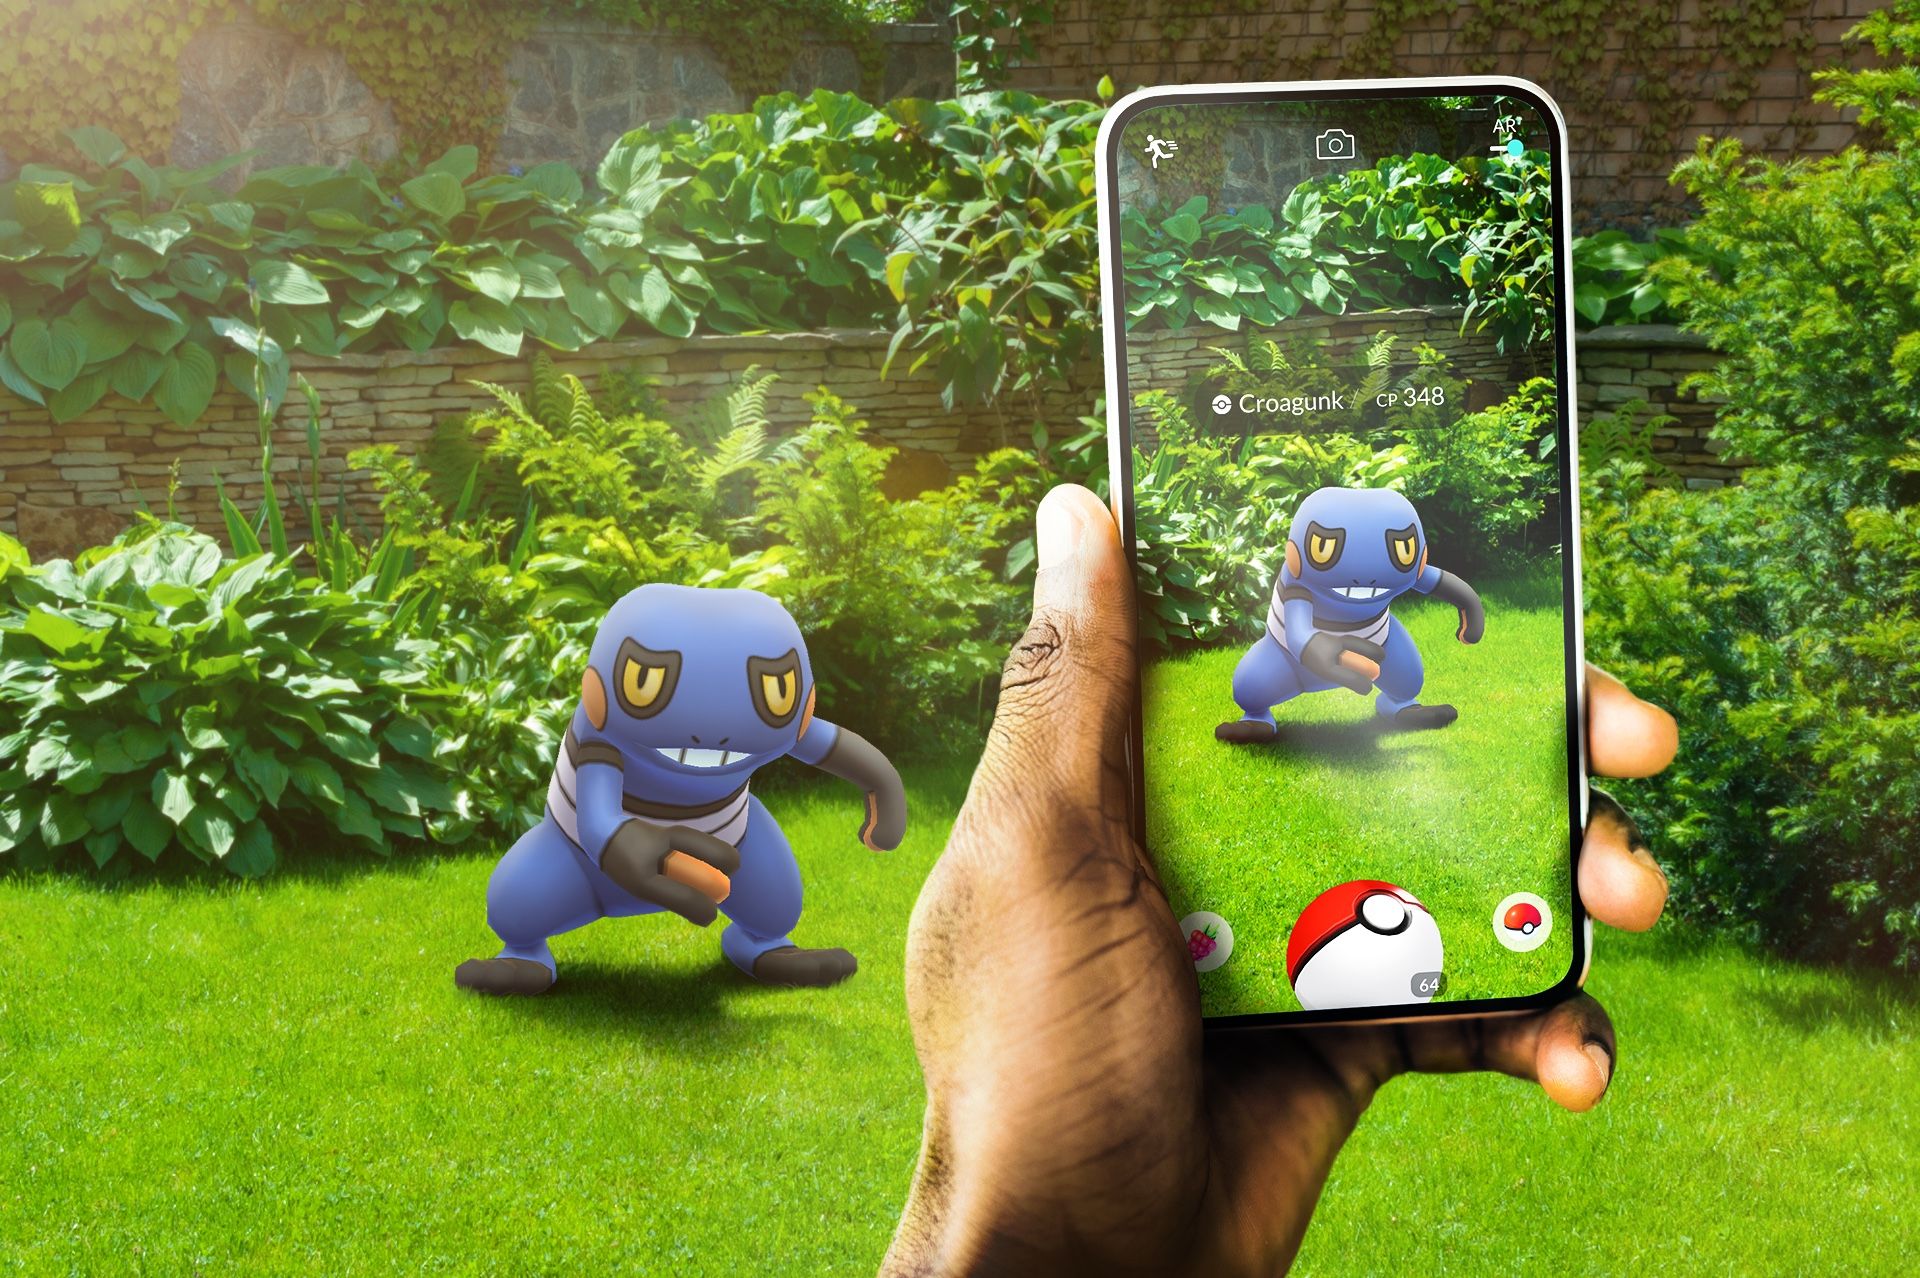 Pokemon GO Update With Promo Codes Event [Try These!] - SlashGear